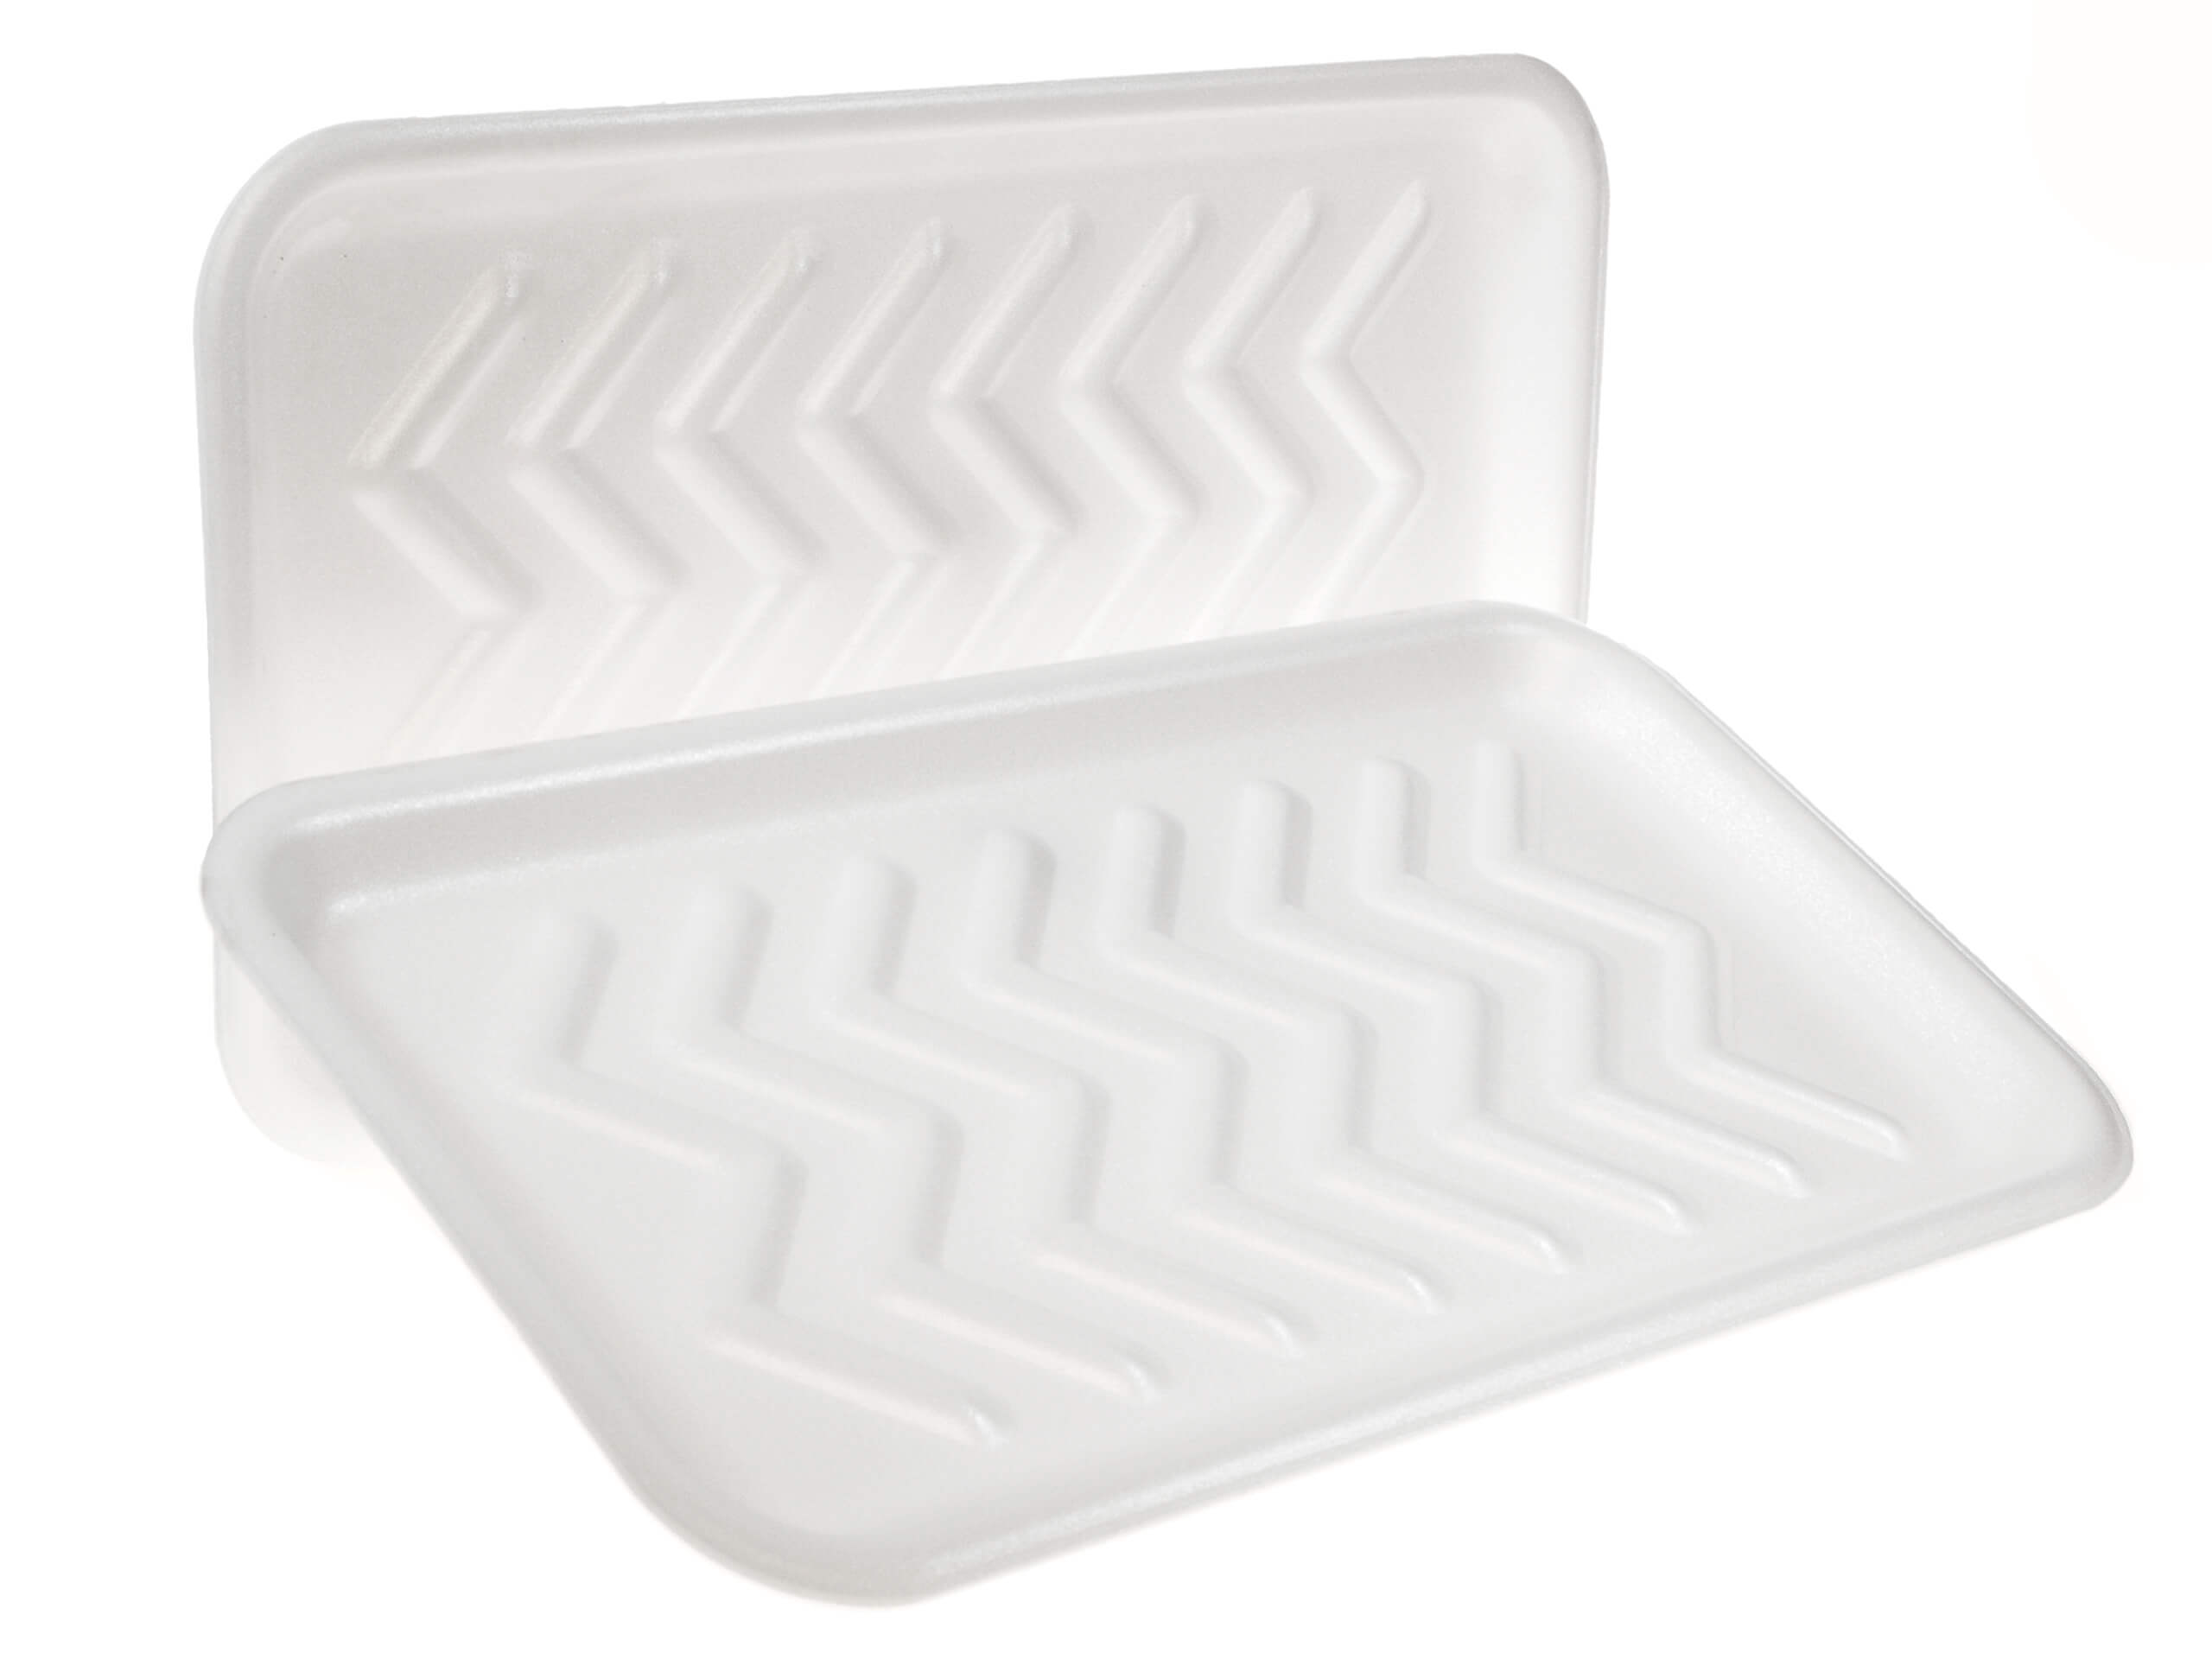 Crafts Foam Trays, White Foam Meat Tray Paint and Ink Mixing Trays Food  Tray School Printmaking Trays for DIY Crafts 5 1/4 x 5 1/4 x 1/2 Inches